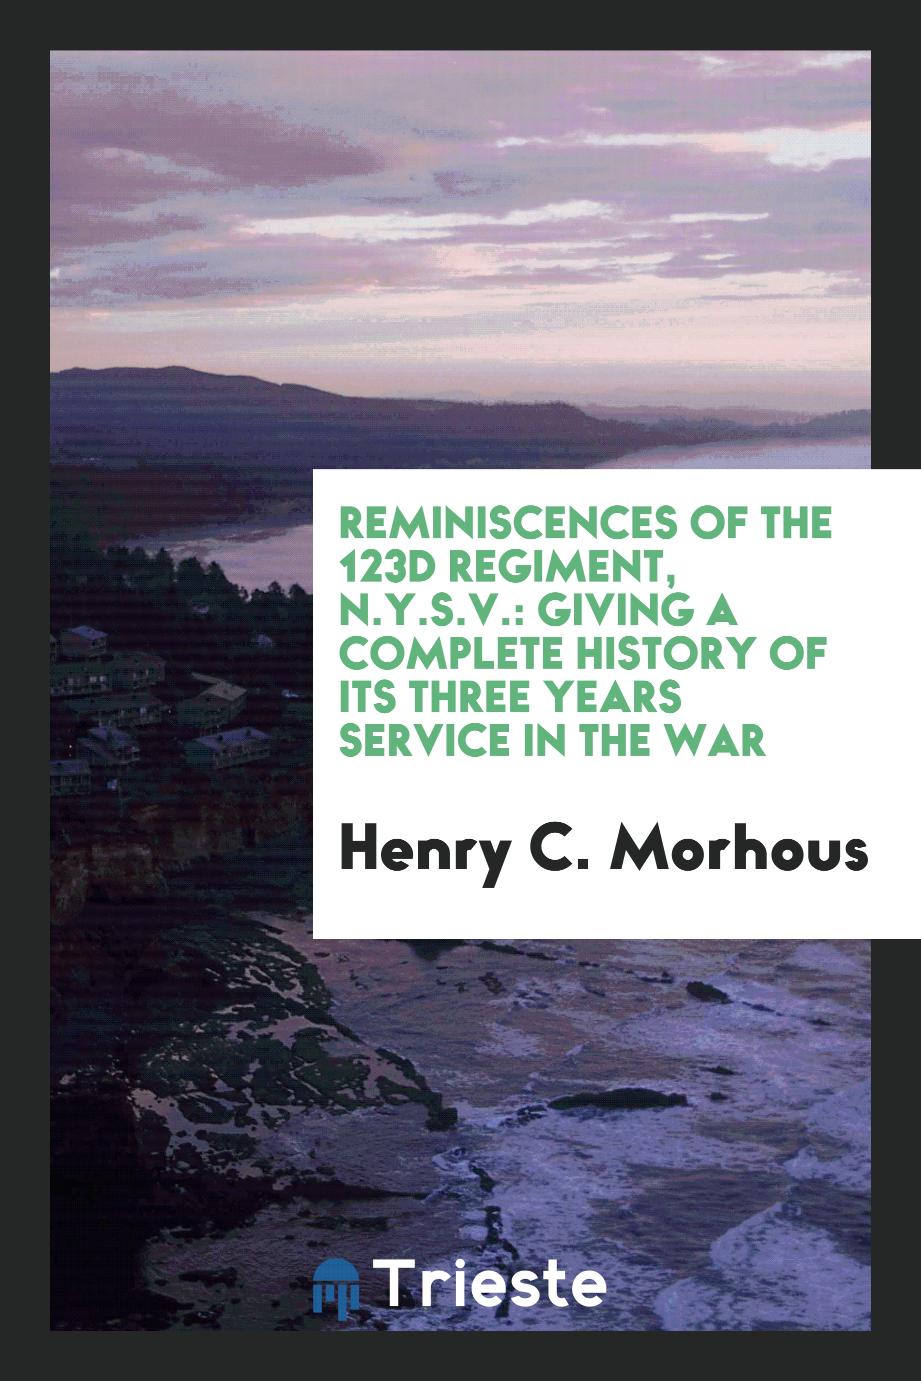 Reminiscences of the 123d Regiment, N.Y.S.V.: Giving a Complete History of Its Three Years Service in the War